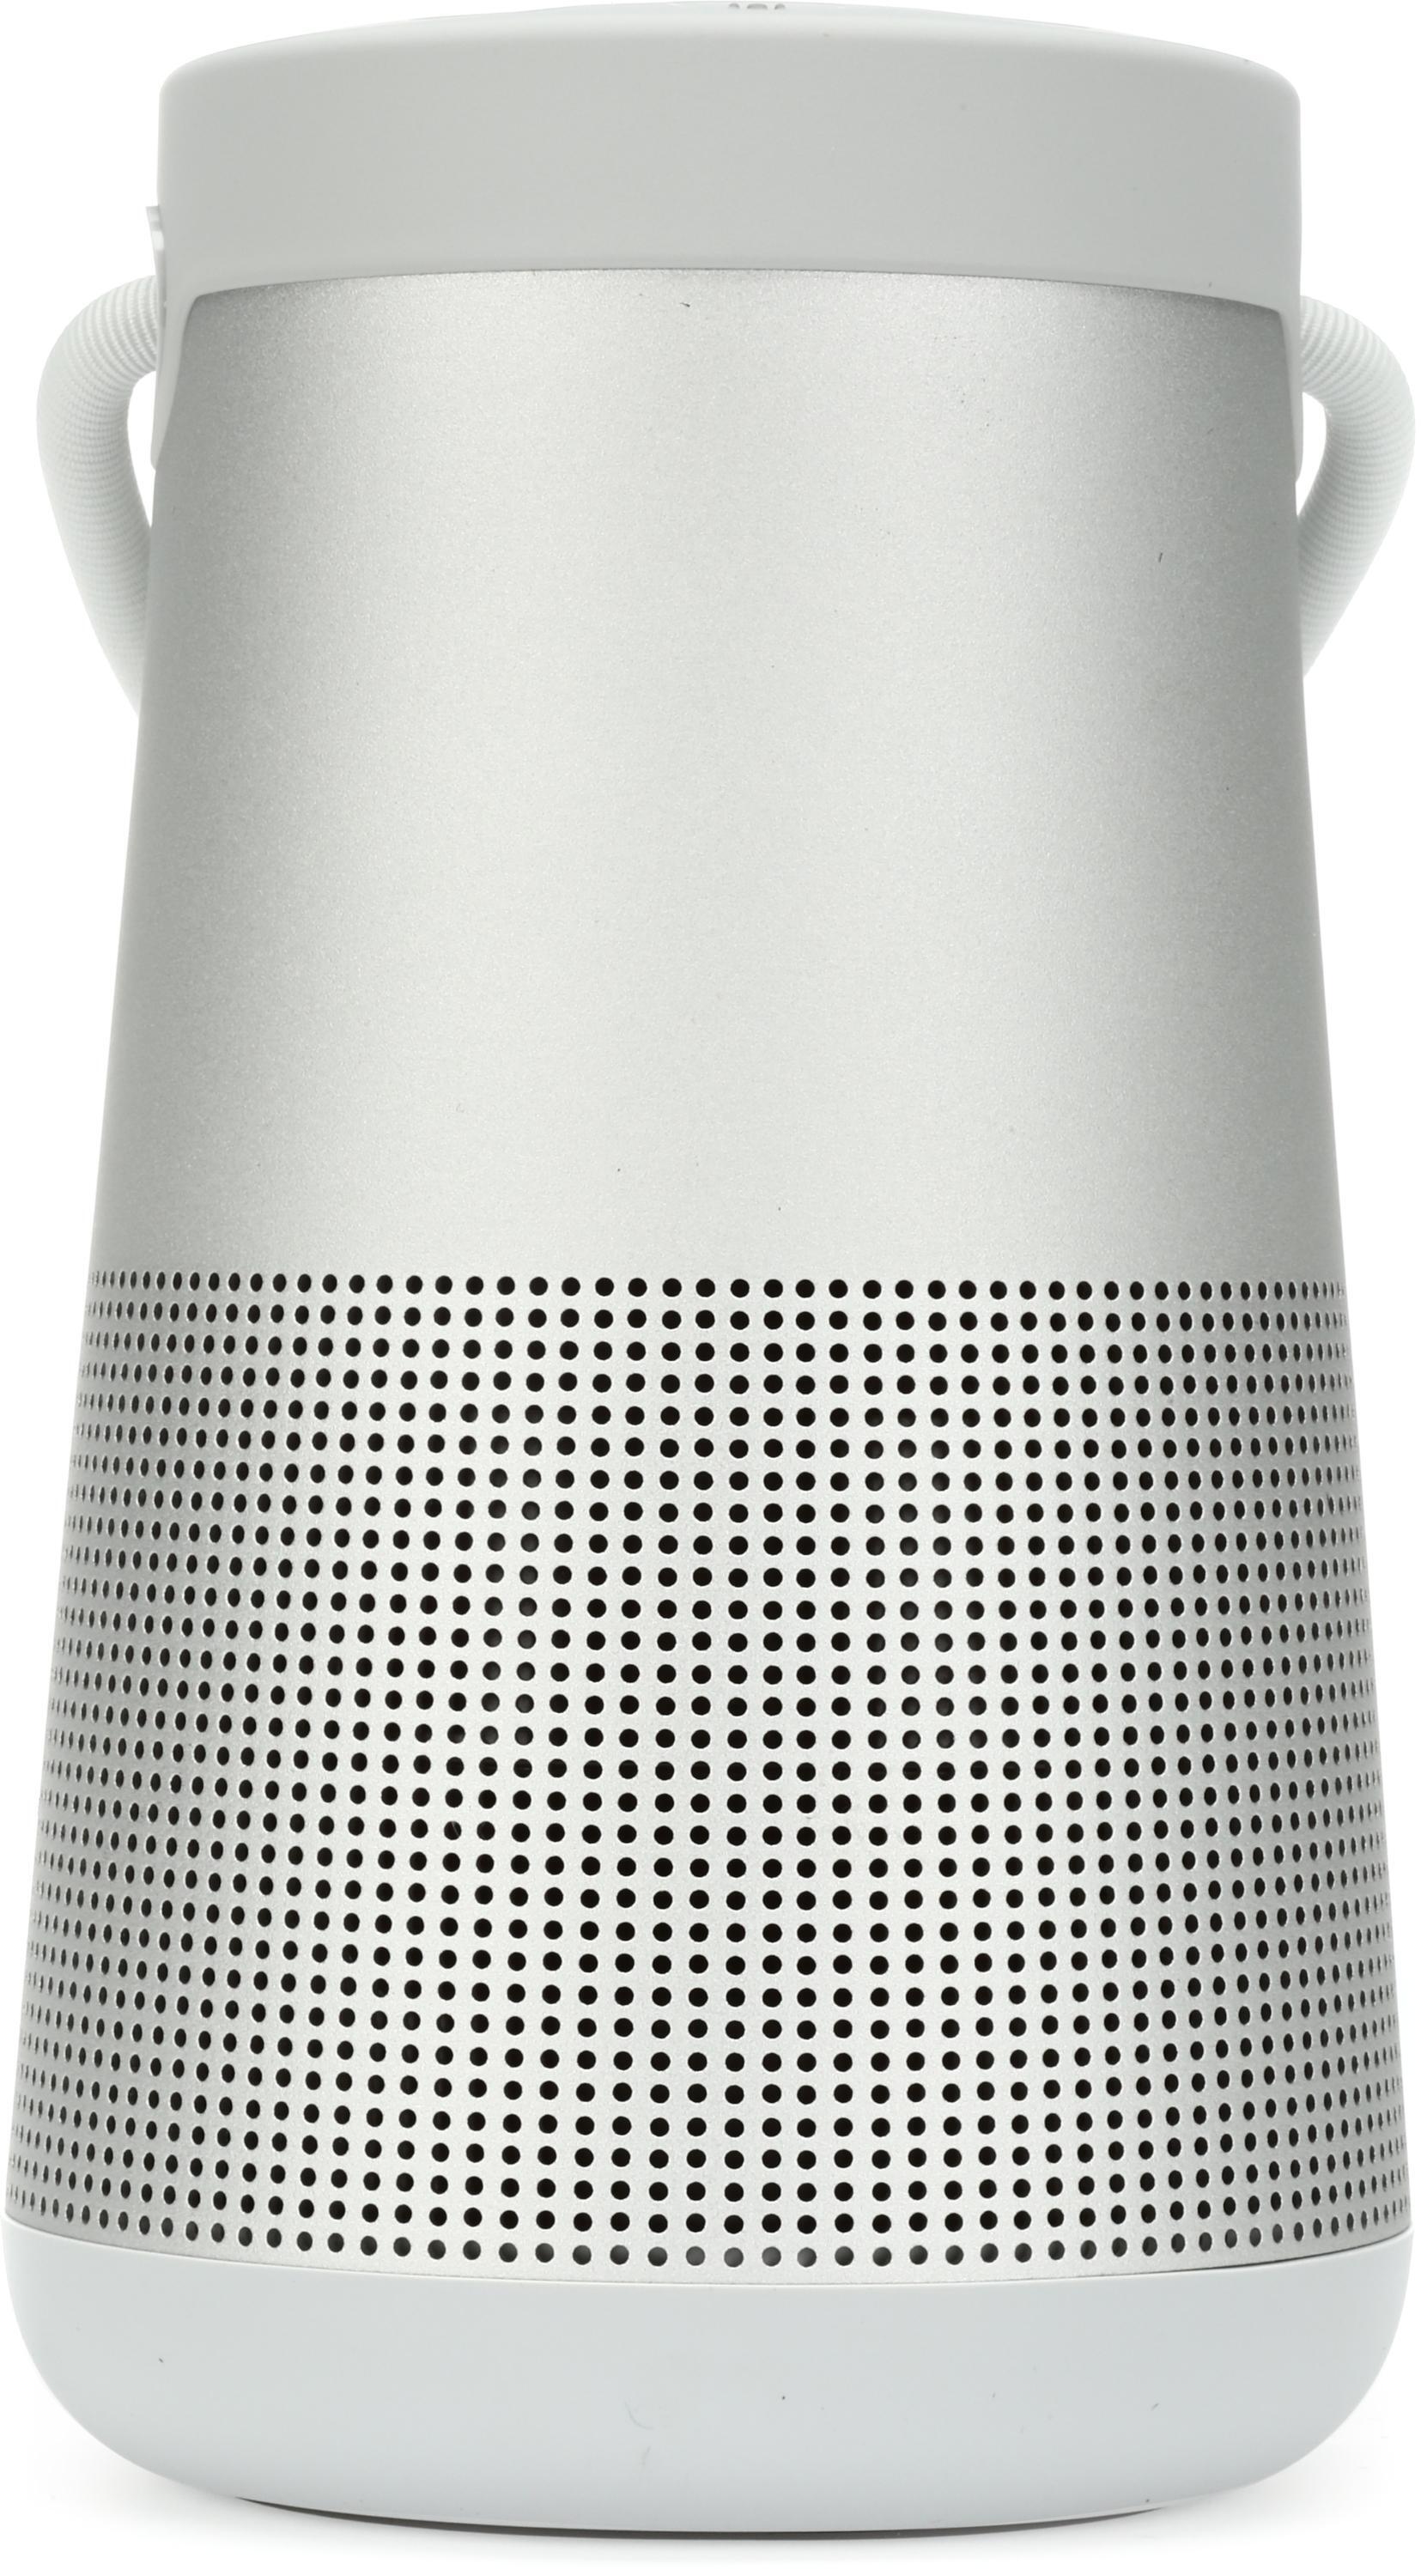 Bose SoundLink Revolve II - Speaker - for portable use - wireless -  Bluetooth, NFC - App-controlled - USB - luxe silver